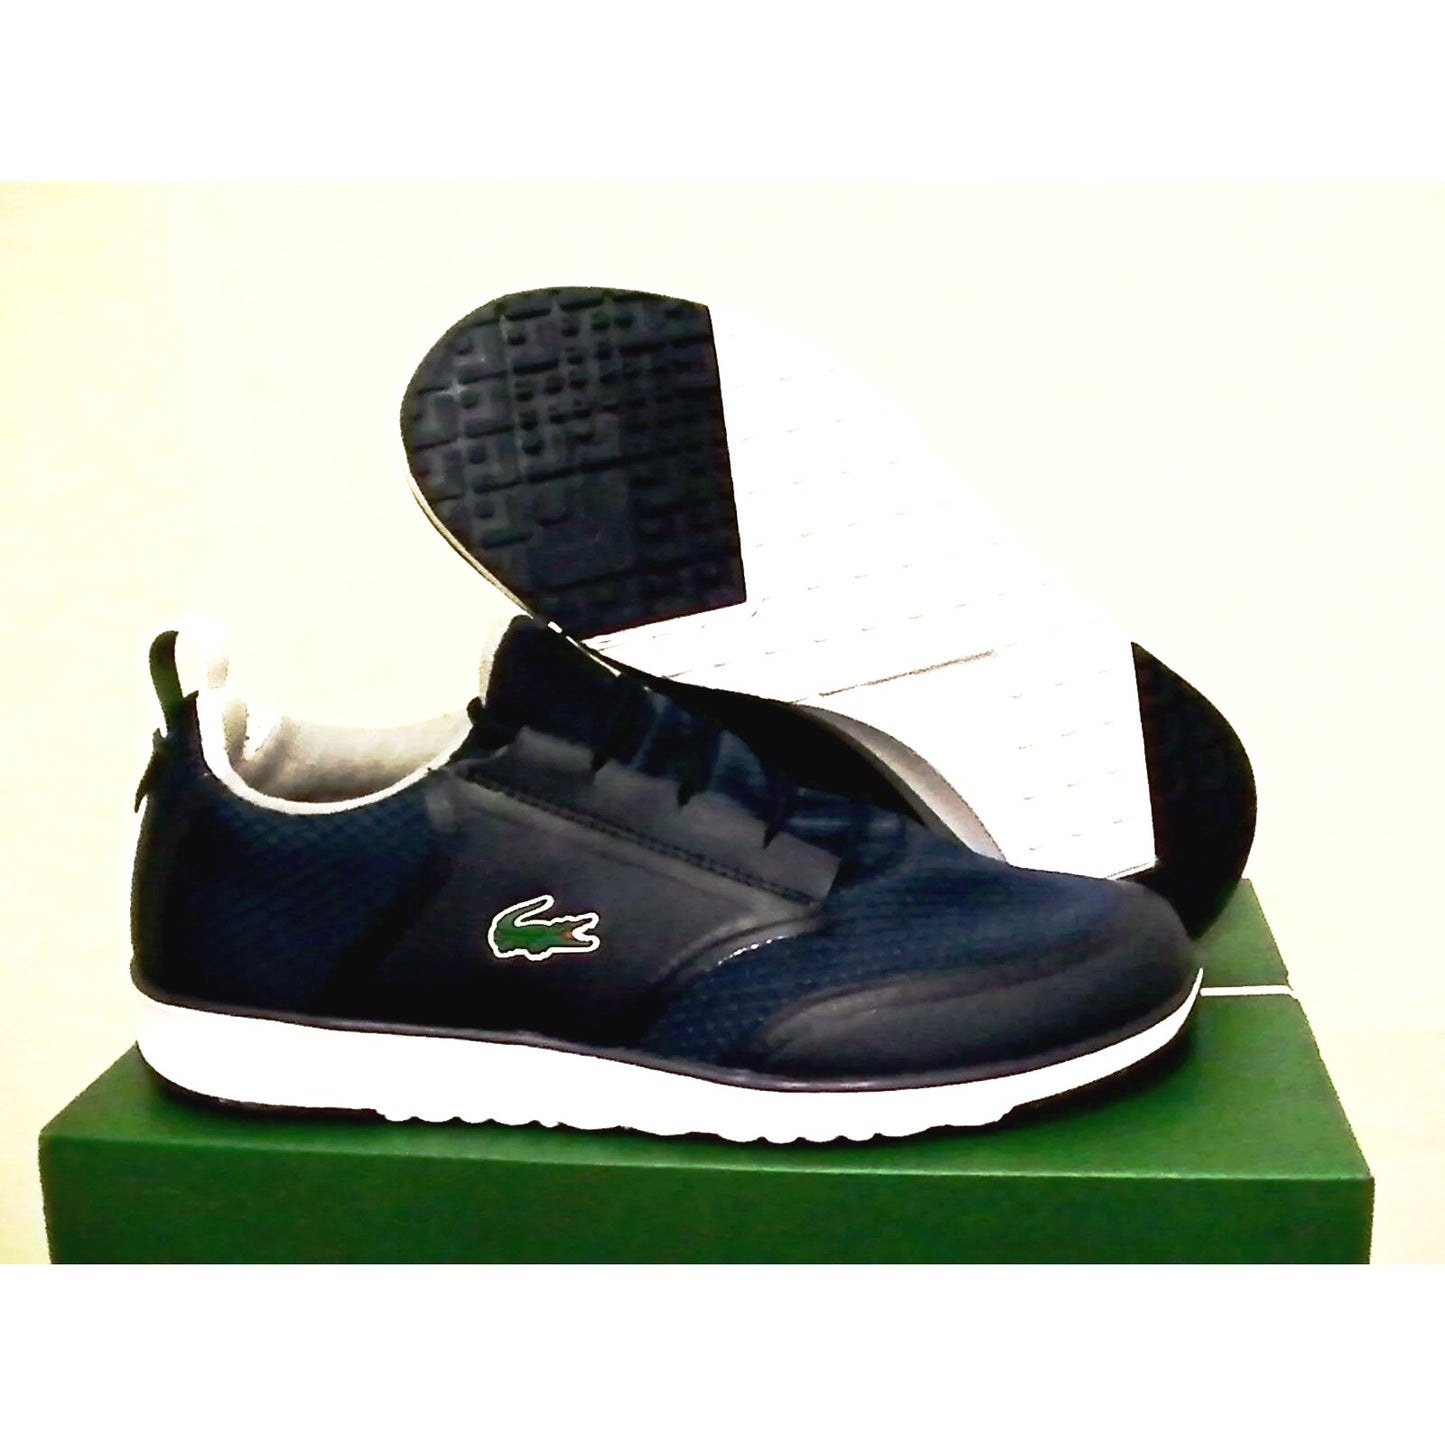 Lacoste shoes L.IGHT LT12 spm txt/syn dark blue training size 7.5 new with box